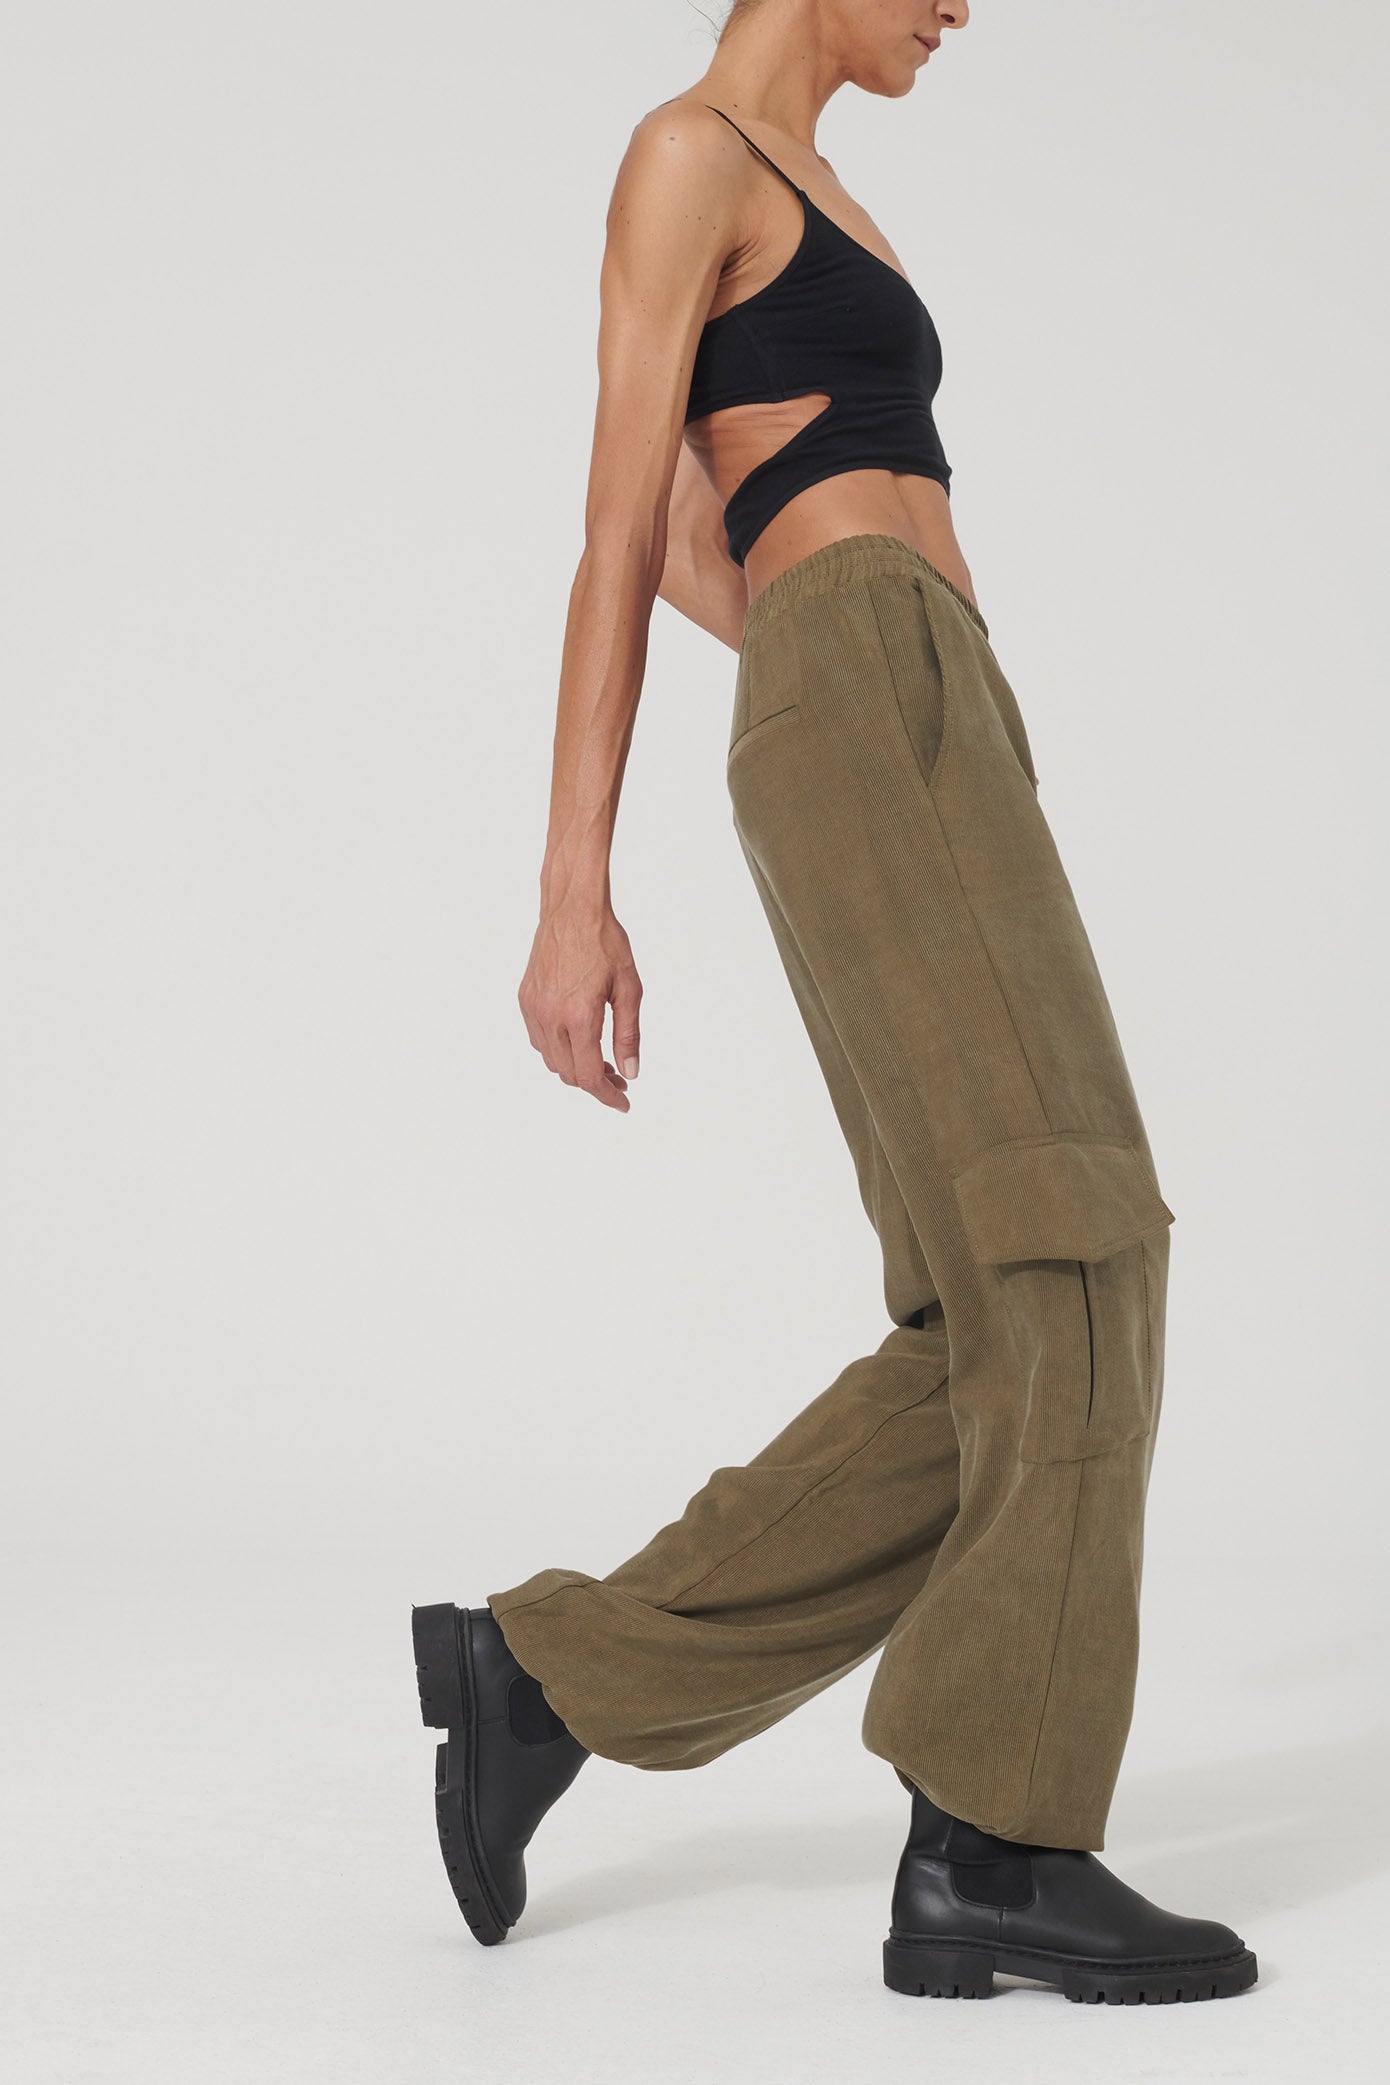 HEDIE trousers in olive color by LOVJOI made from Ecovero™